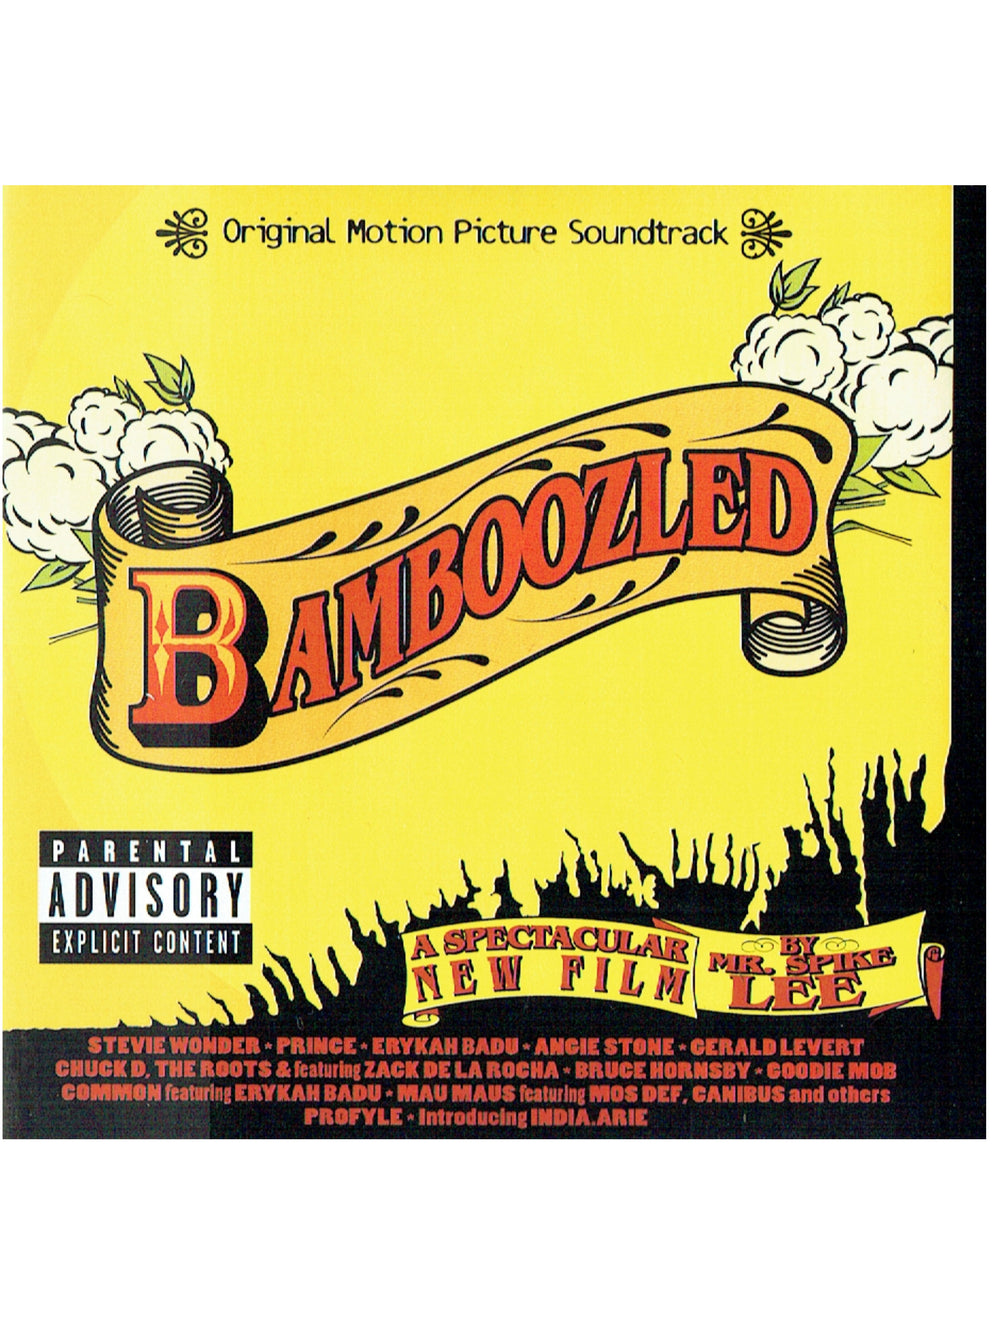 Prince –  Various Artists Bamboozled Original Motion Picture Soundtrack CD Album Sealed: 2000